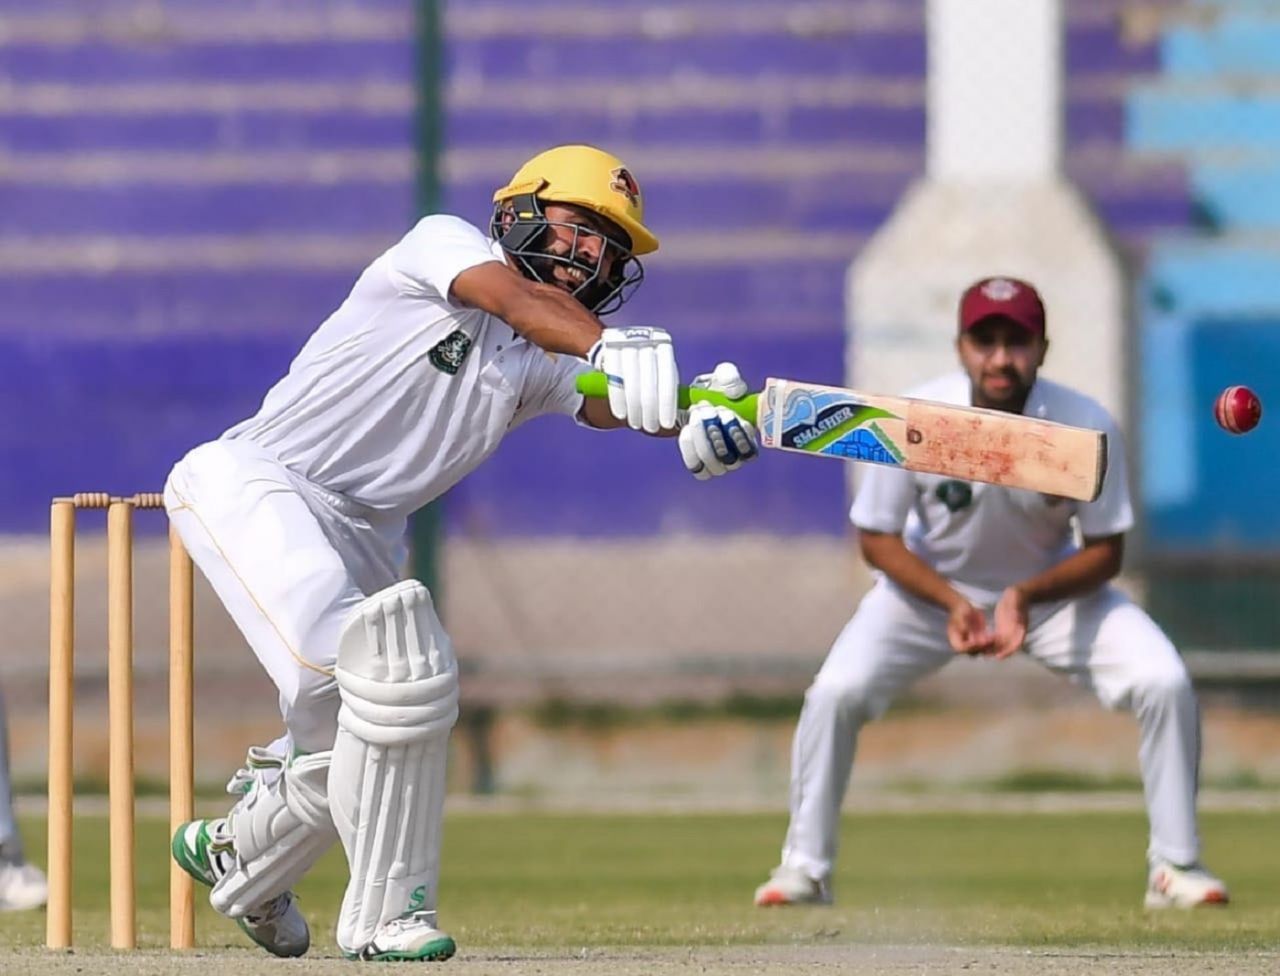 Fawad Alam reaches out for a stroke, Southern Punjab (Pakistan) v Sindh, Quaid-e-Azam Trophy 2019-20, day 3, November 27, 2019